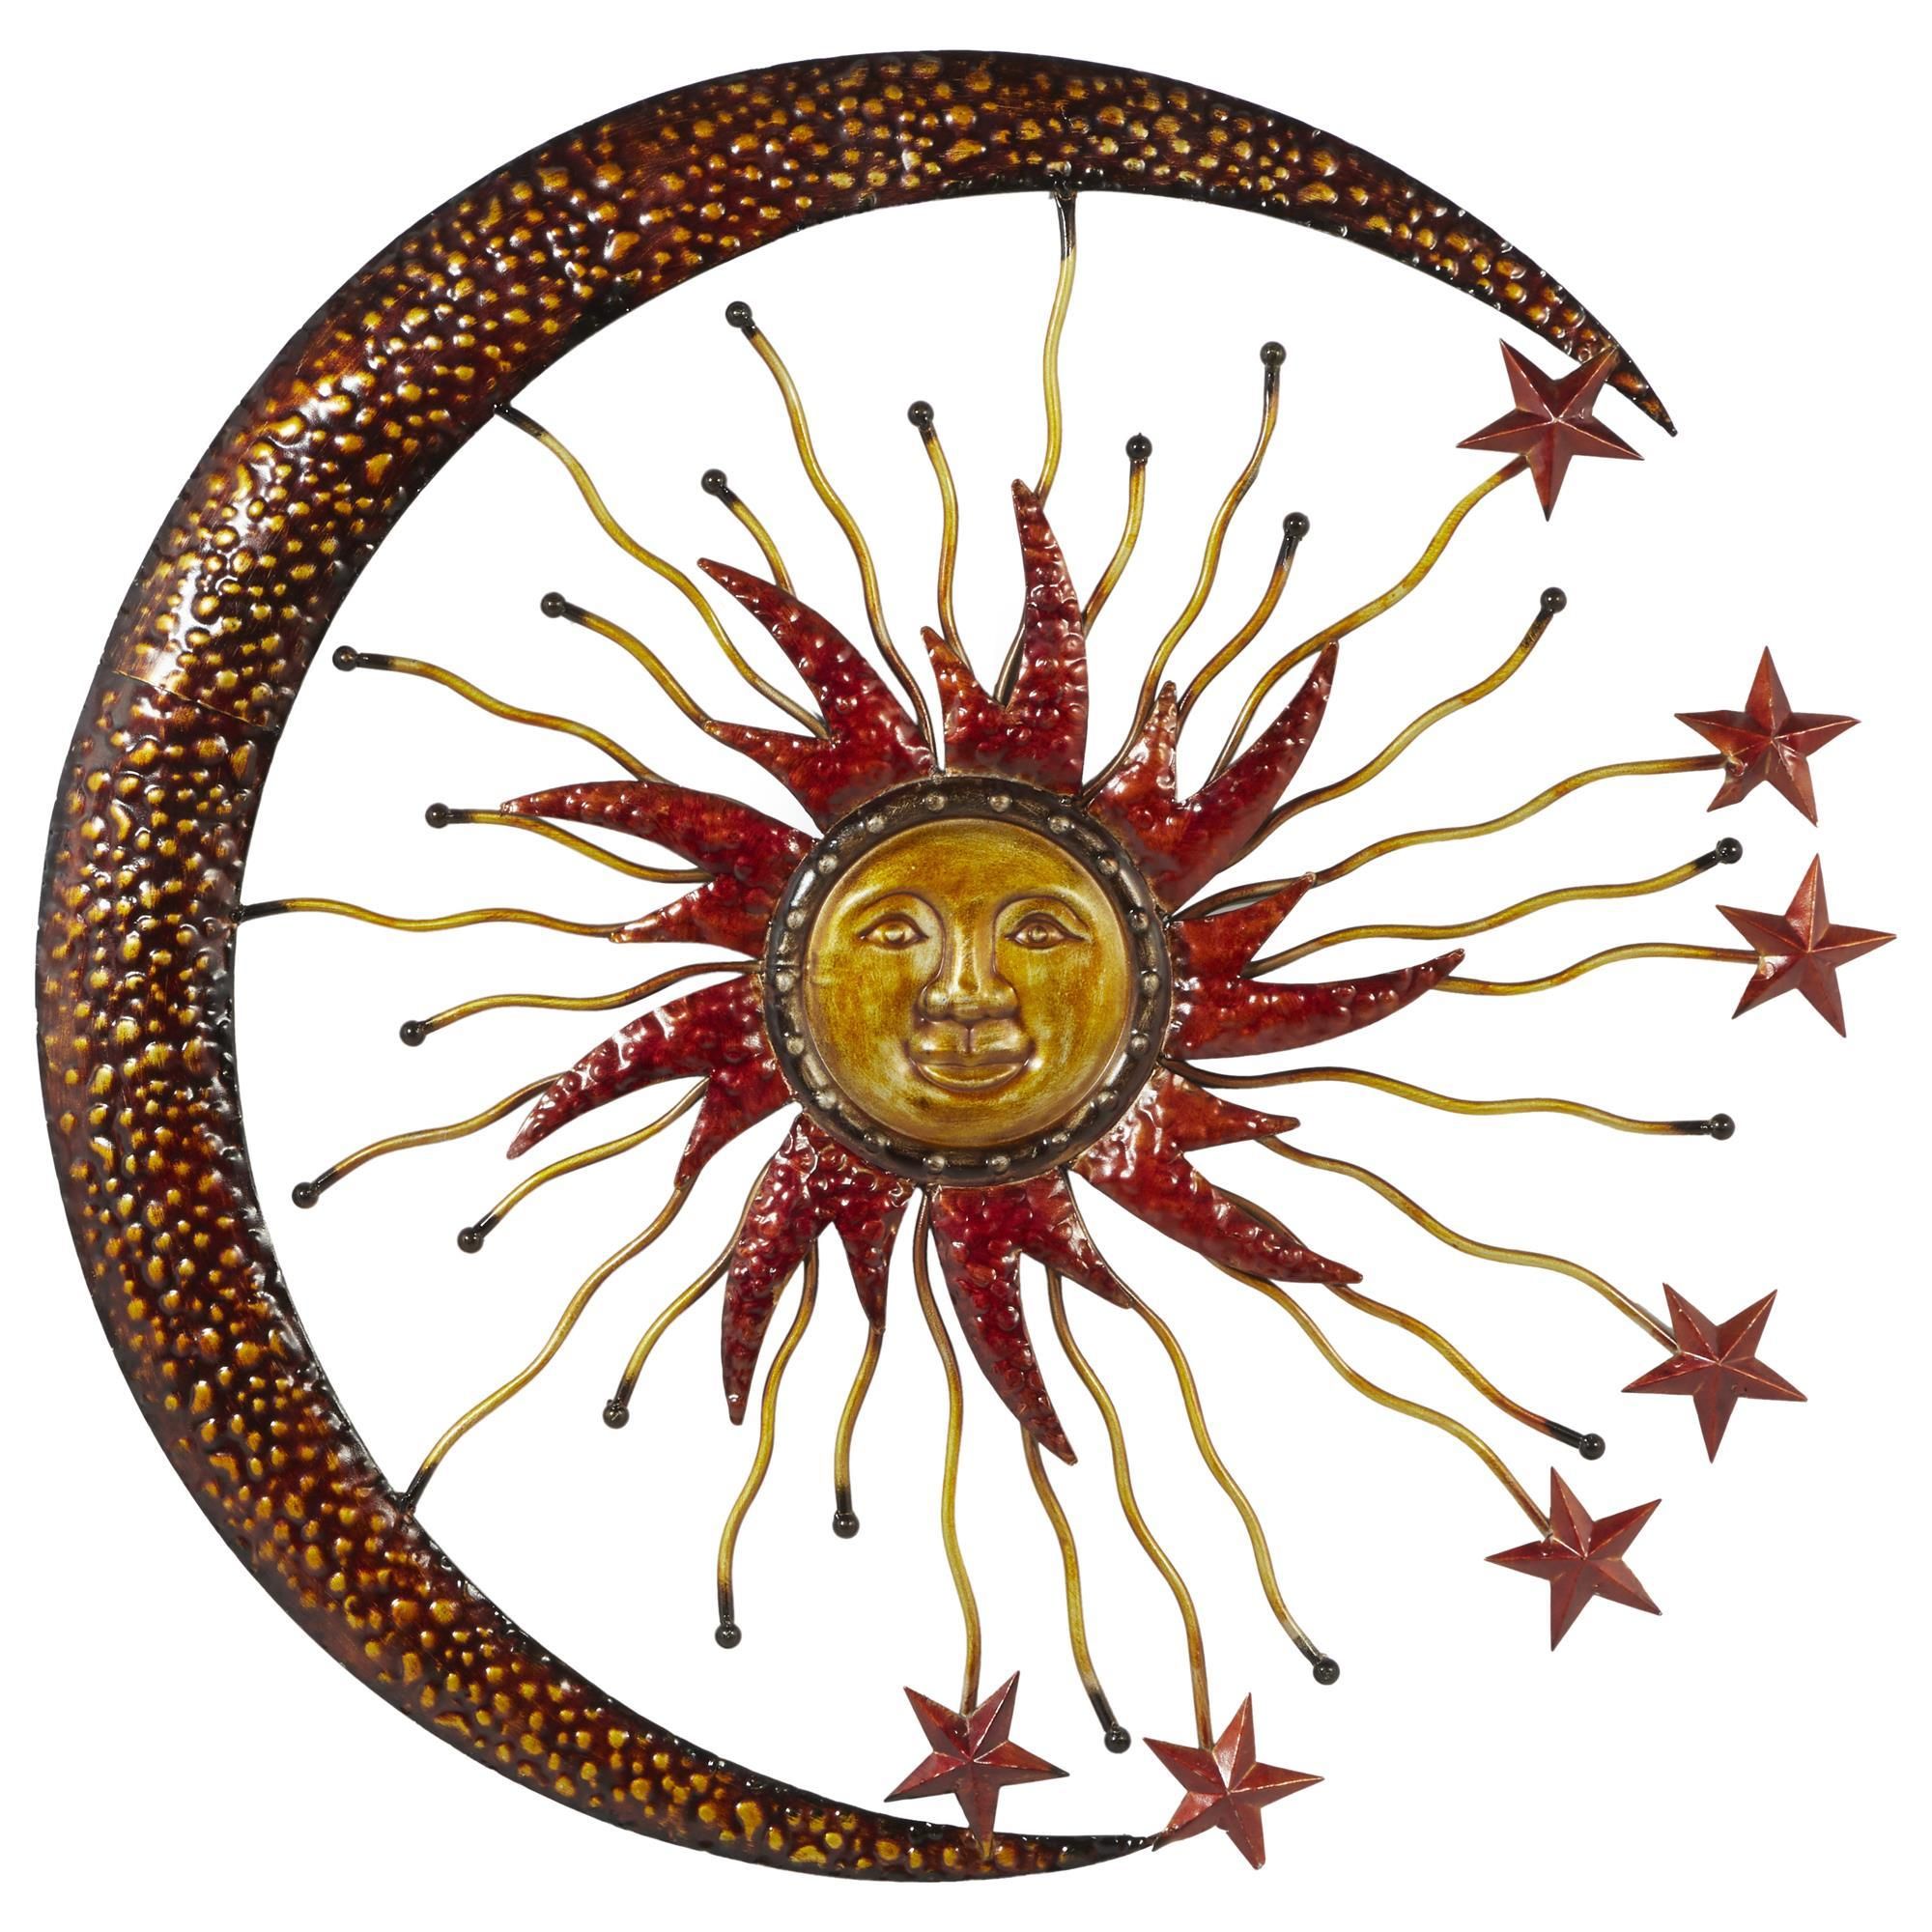 Maple And Jade 36" X 36" Sun, Moon And Star Wall Decor In Metallic Copper  And Bronze | Nfm In Recent Sun Moon Star Wall Art (View 10 of 20)